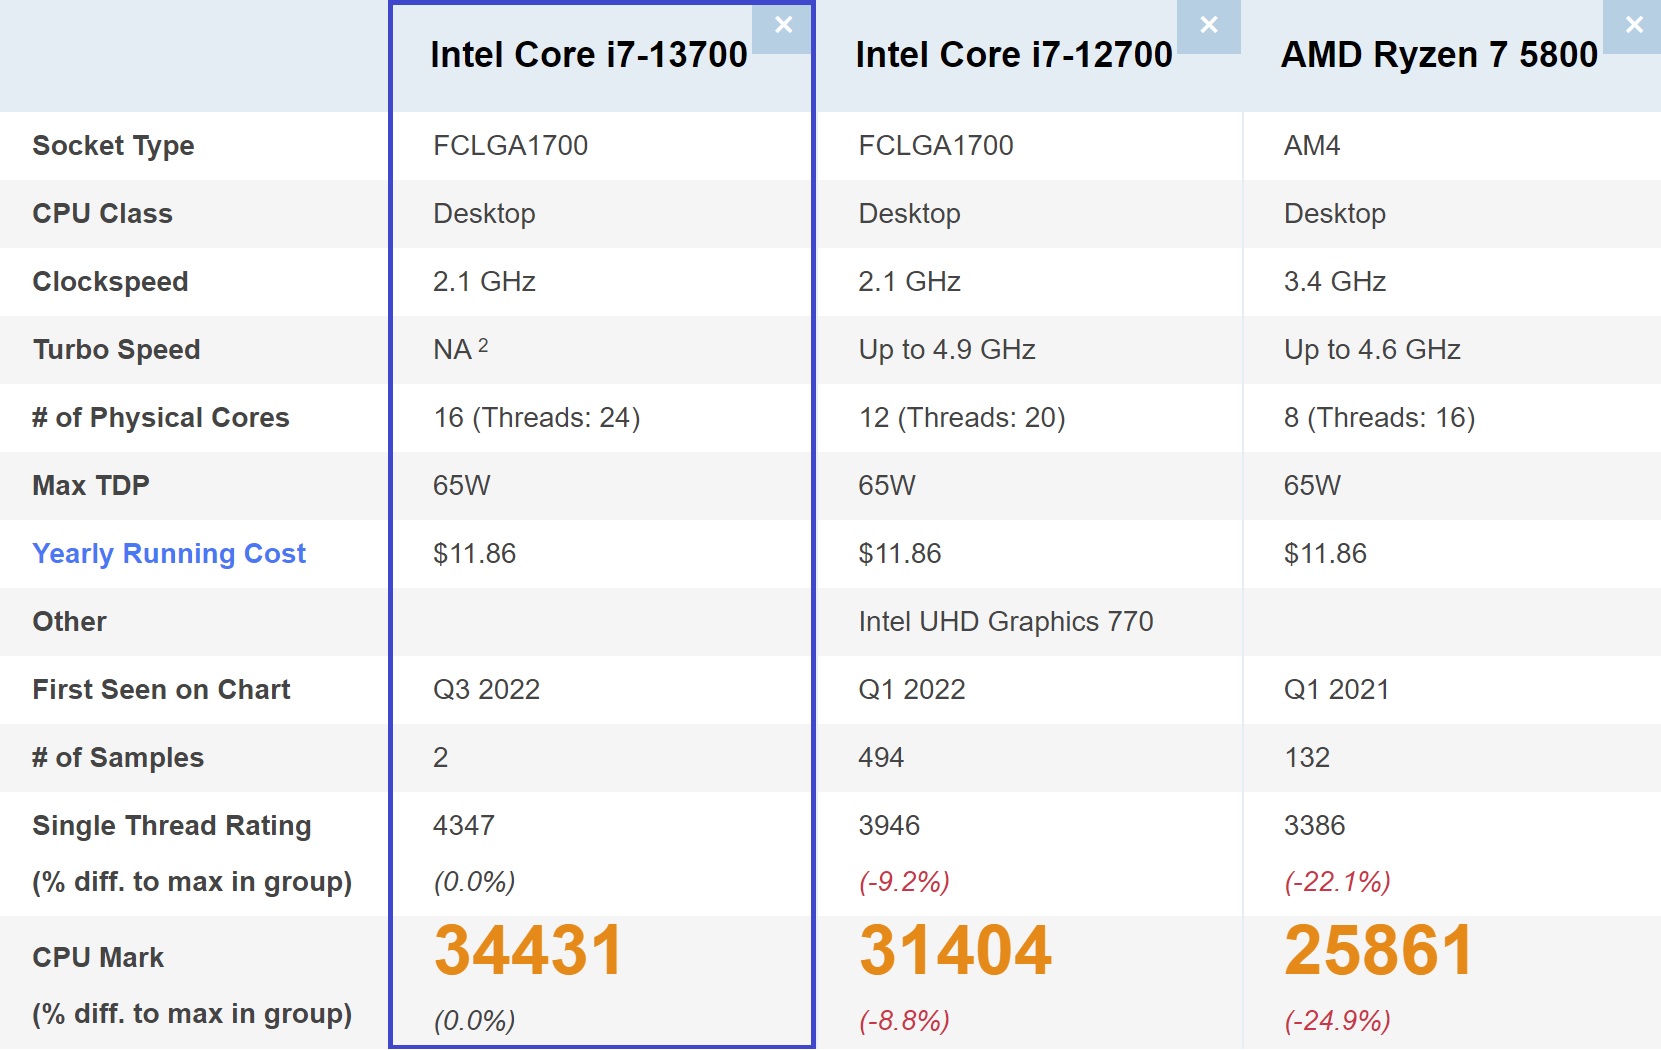 More-core Intel Core i7-13700 makes underwhelming first appearance